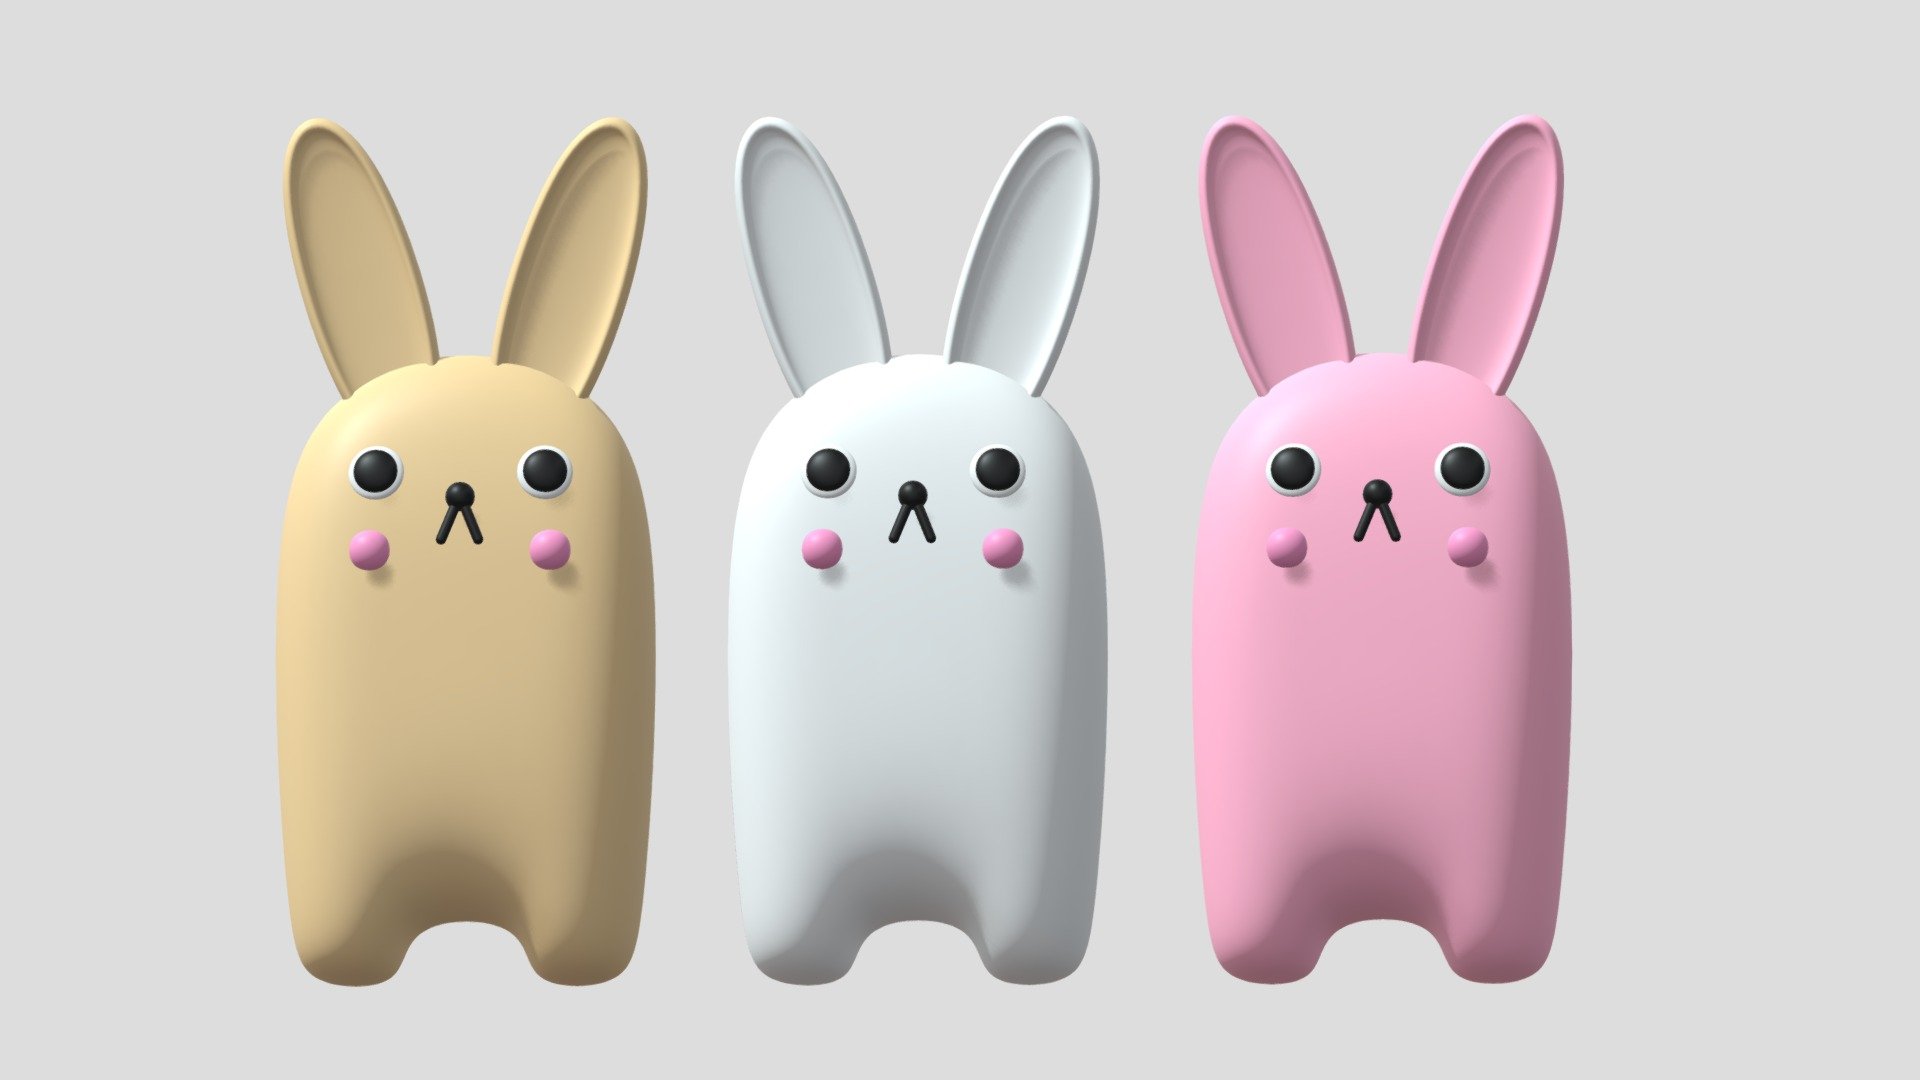 -Cartoon Cute Bunny Rabbit.

-This product contains 10 objects.

-High Poly : Verts : 25,074 Faces : 25,152.

-Mid Poly : Verts : 7,922 Faces : 8,128.

-This product was created in Blender 2.935.

-Formats: blend, fbx, obj, c4d, dae, abc, stl, glb, unity.

-We hope you enjoy this model.

-Thank you 3d model